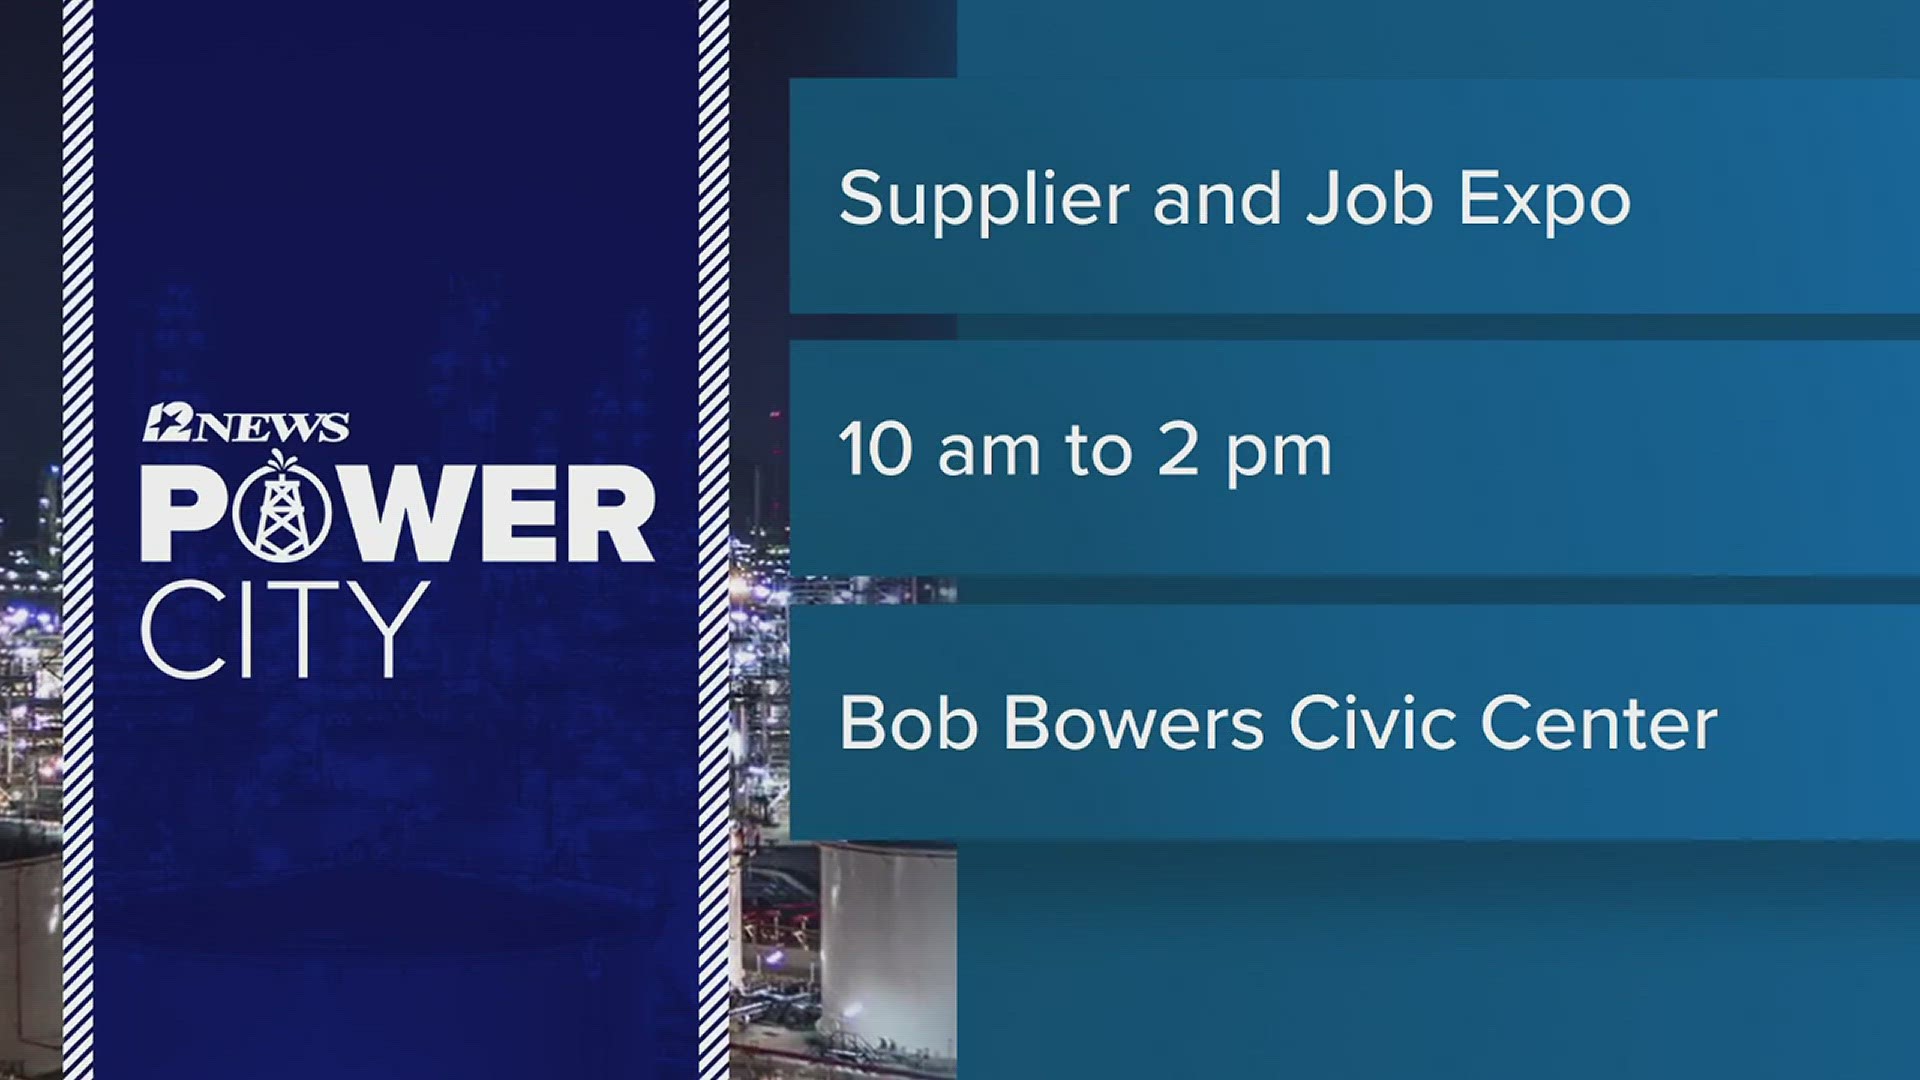 It runs from 10 a.m. to 2 p.m. at the Bob bowers civic center.